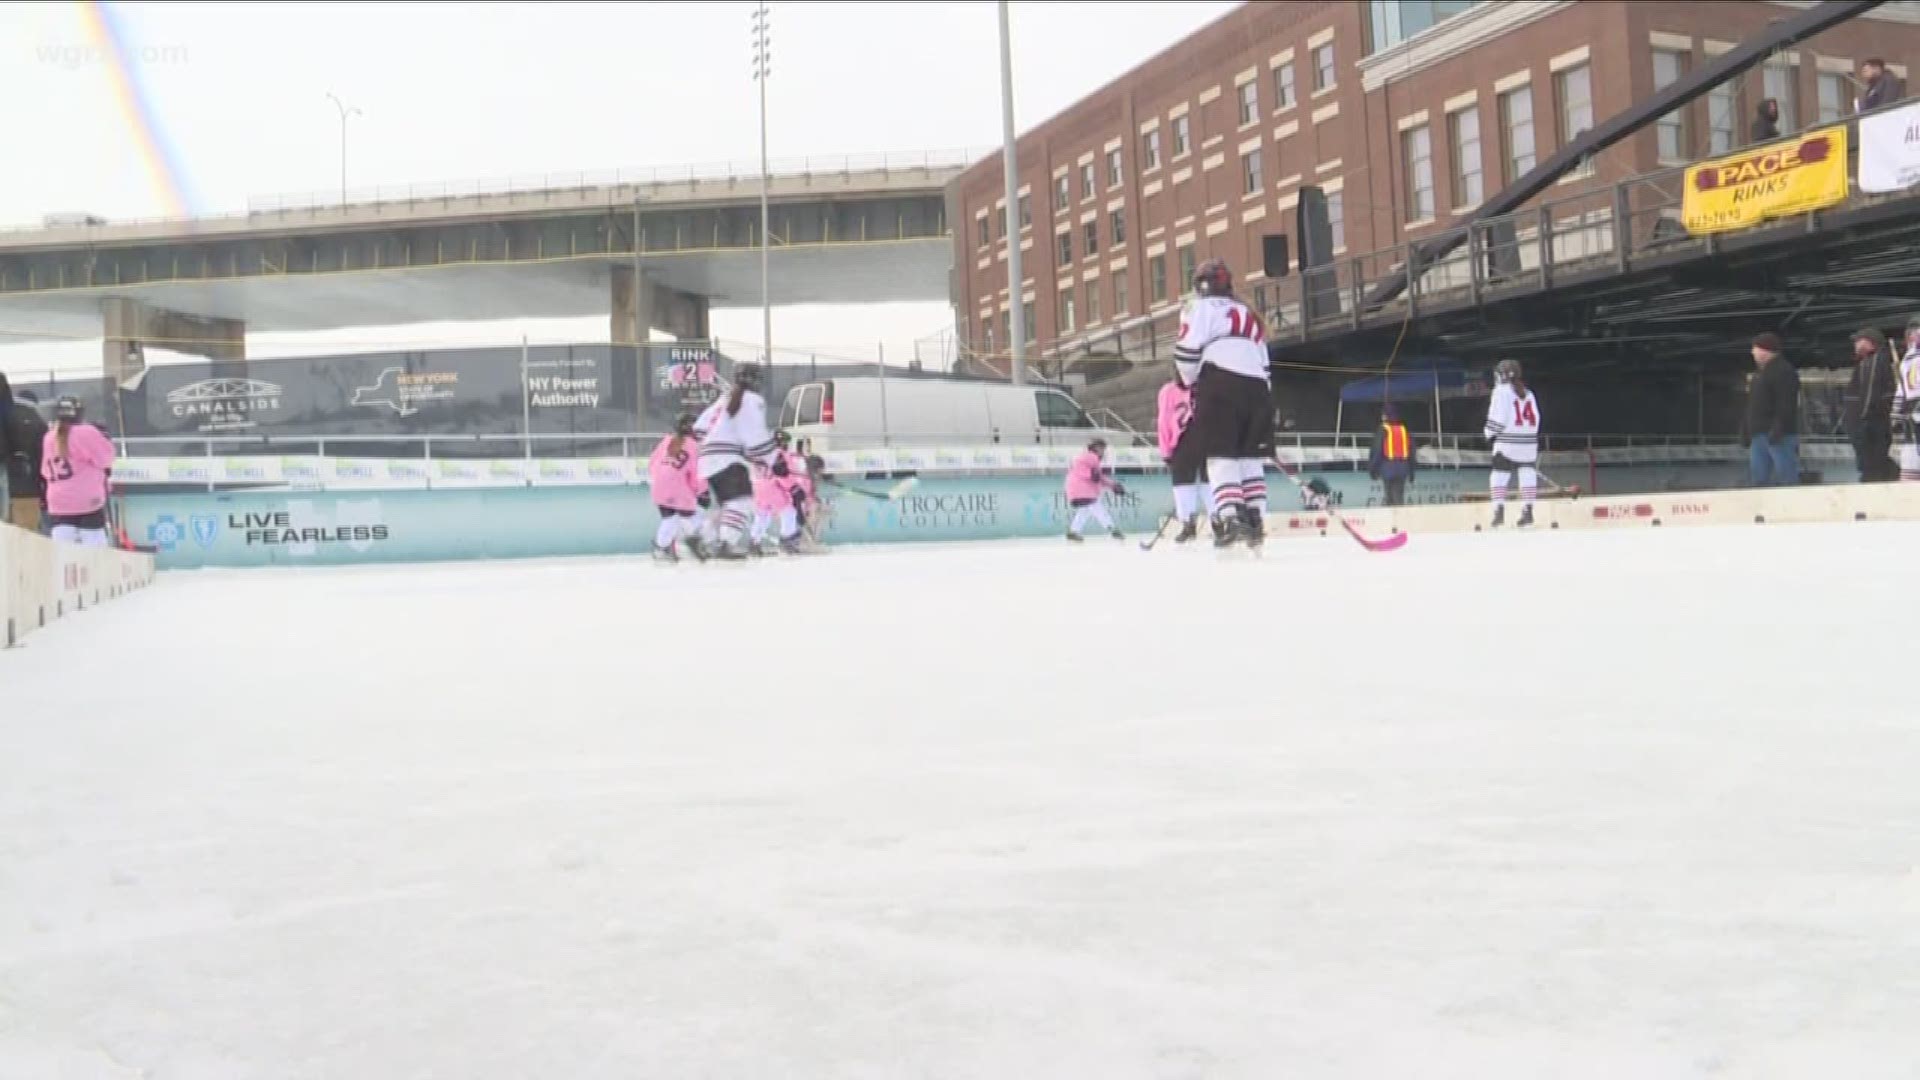 Backyard classic tournament at Canalside